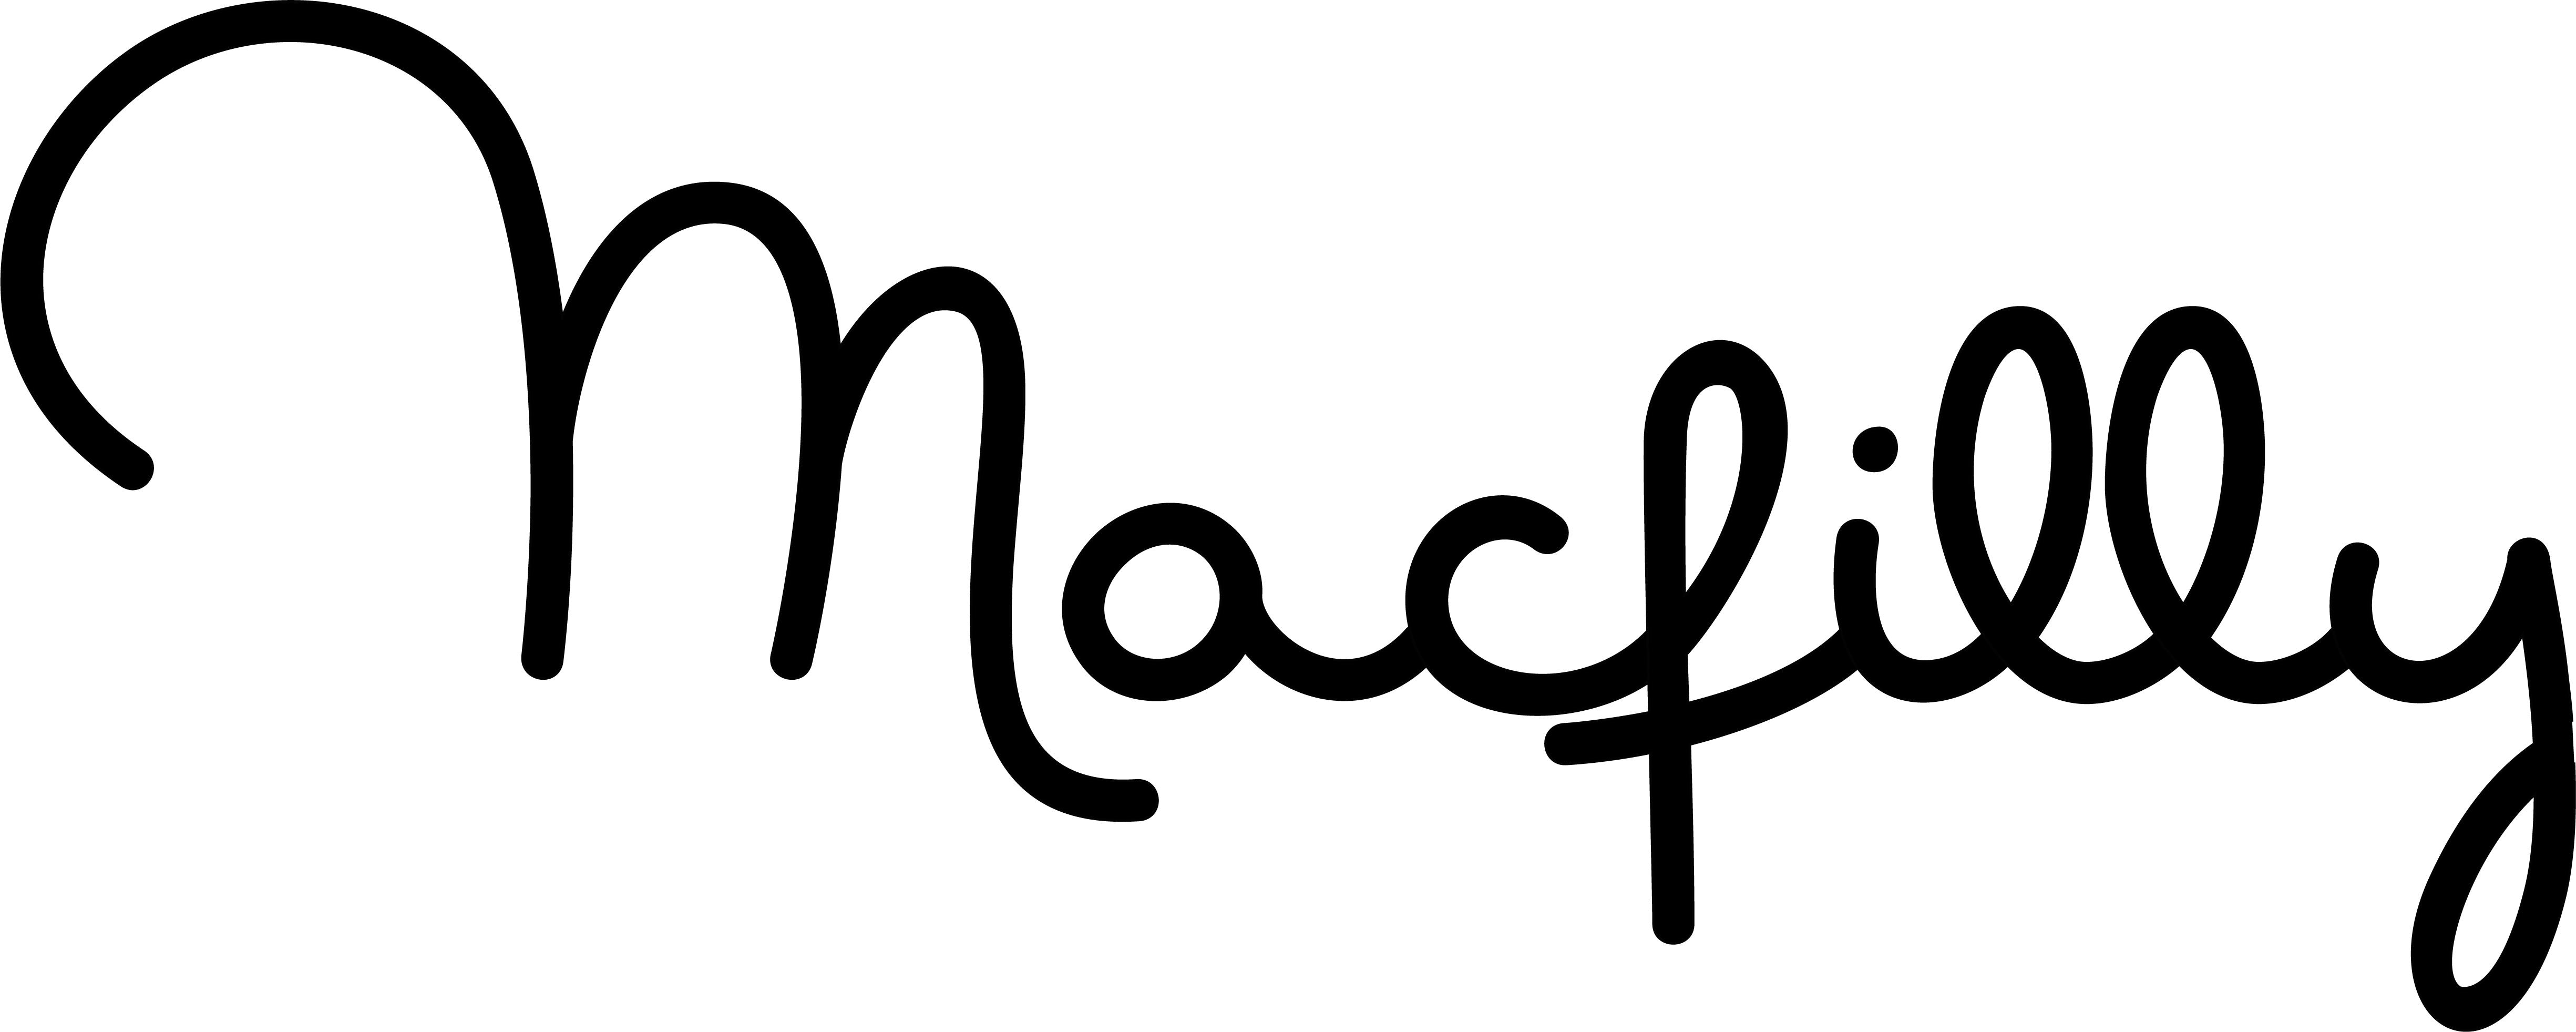 Macfilly Was Born From A Combination Of Wanting To - Calligraphy (4901x1963)